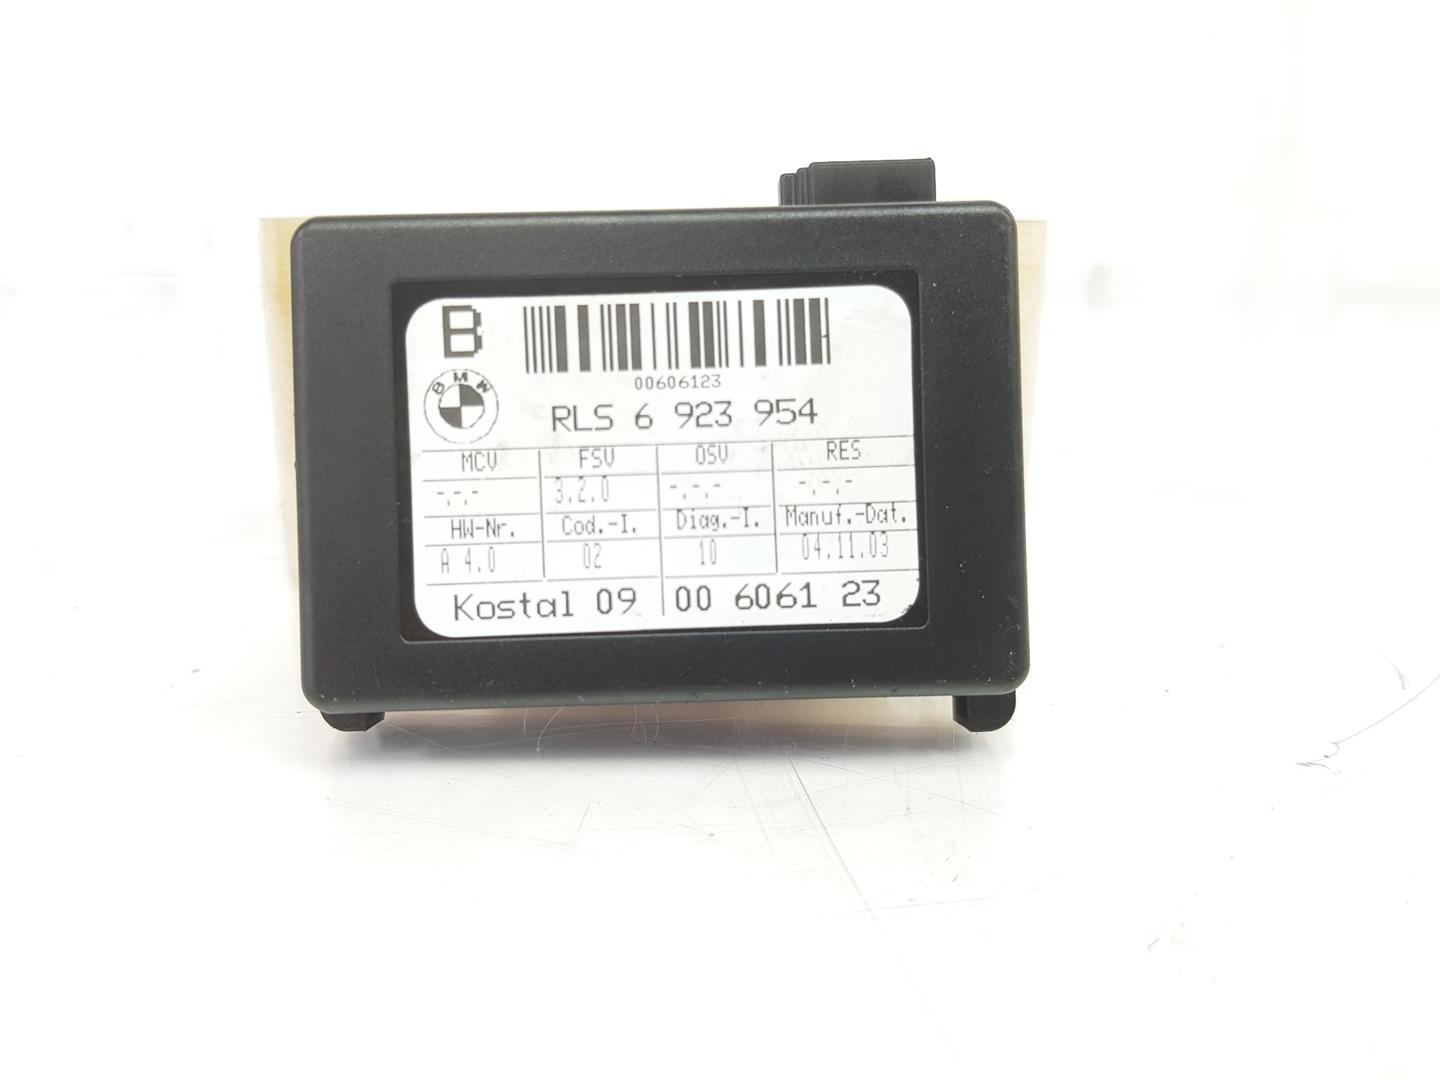 BMW X3 E83 (2003-2010) Other Control Units 61356923954, 6923954 24173908